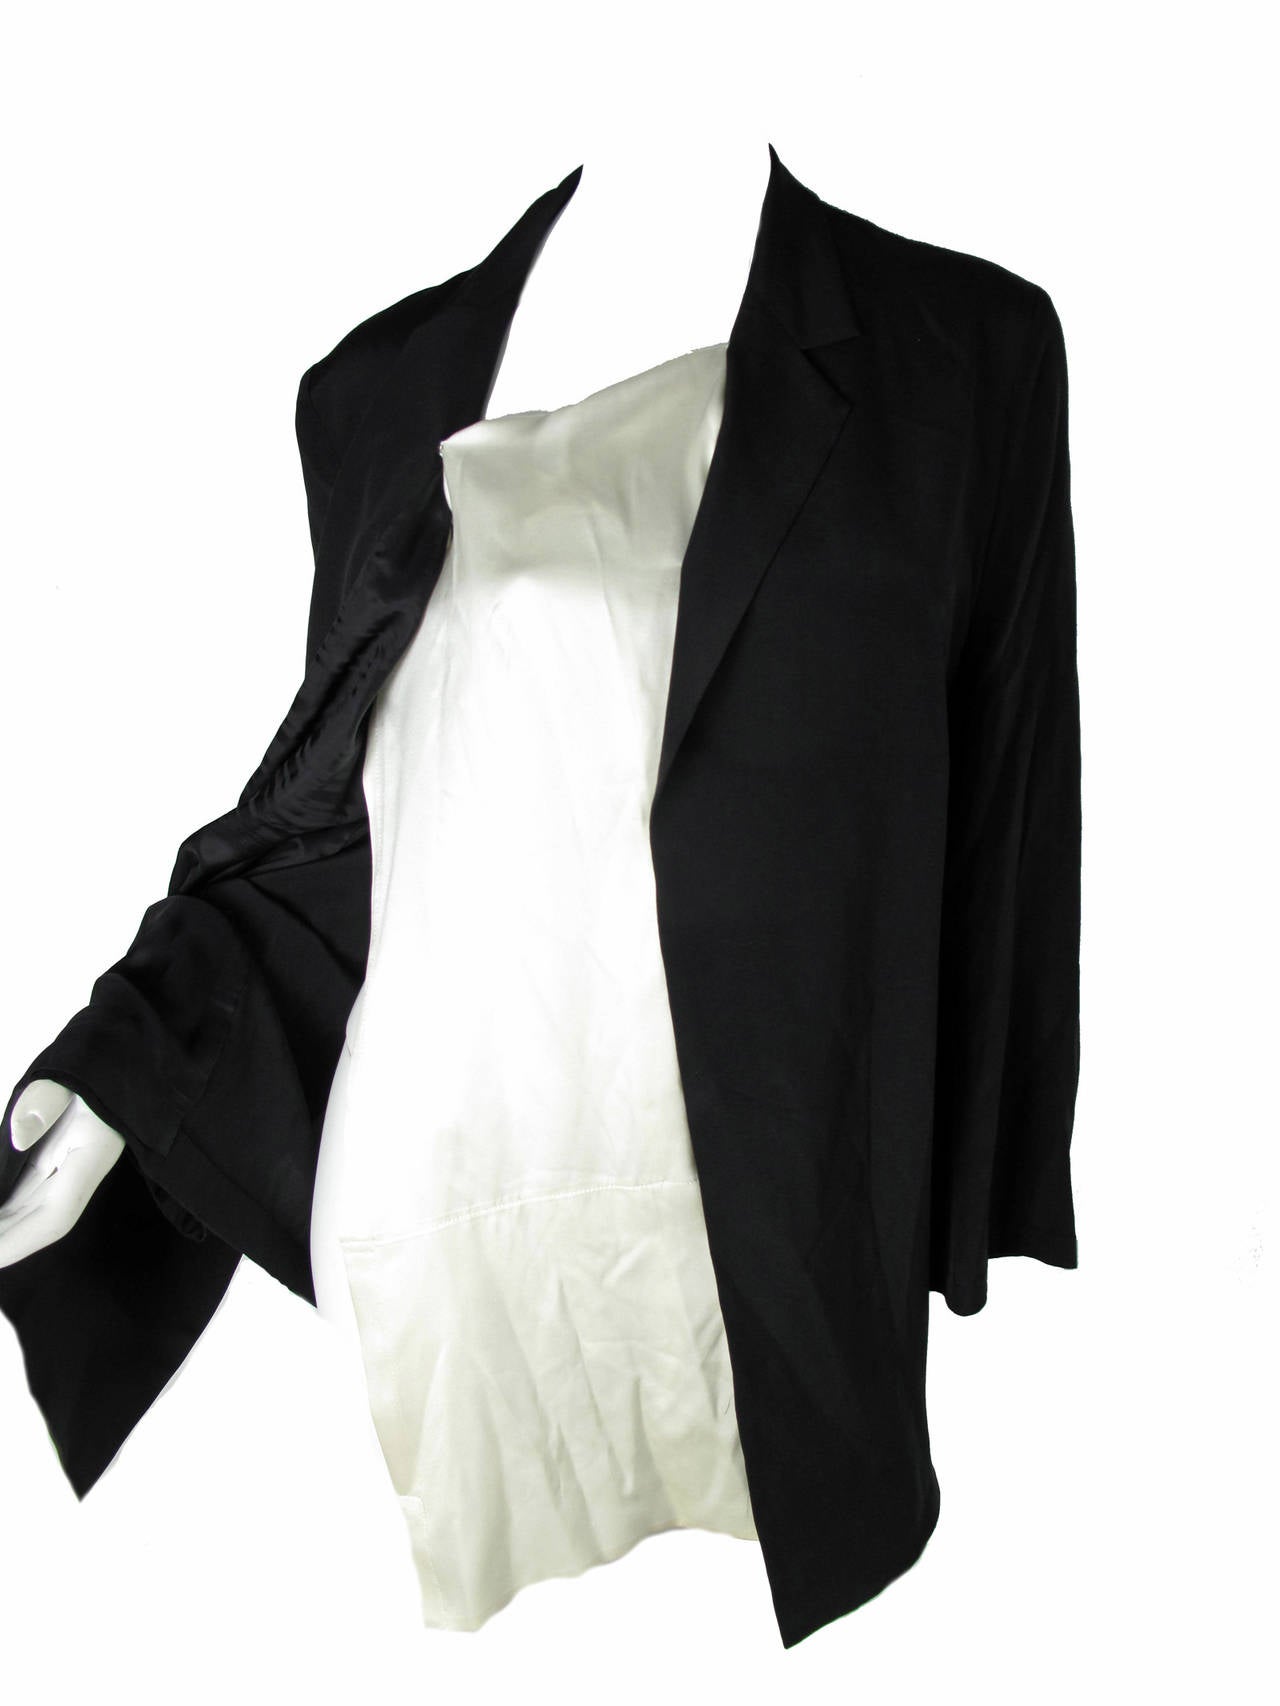 Gorgeous Yohji Yamamoto black silk blazer with asymmetrical cream silk fabric that snaps in place to look like a shirt.  Can be removed.  Size Large

38